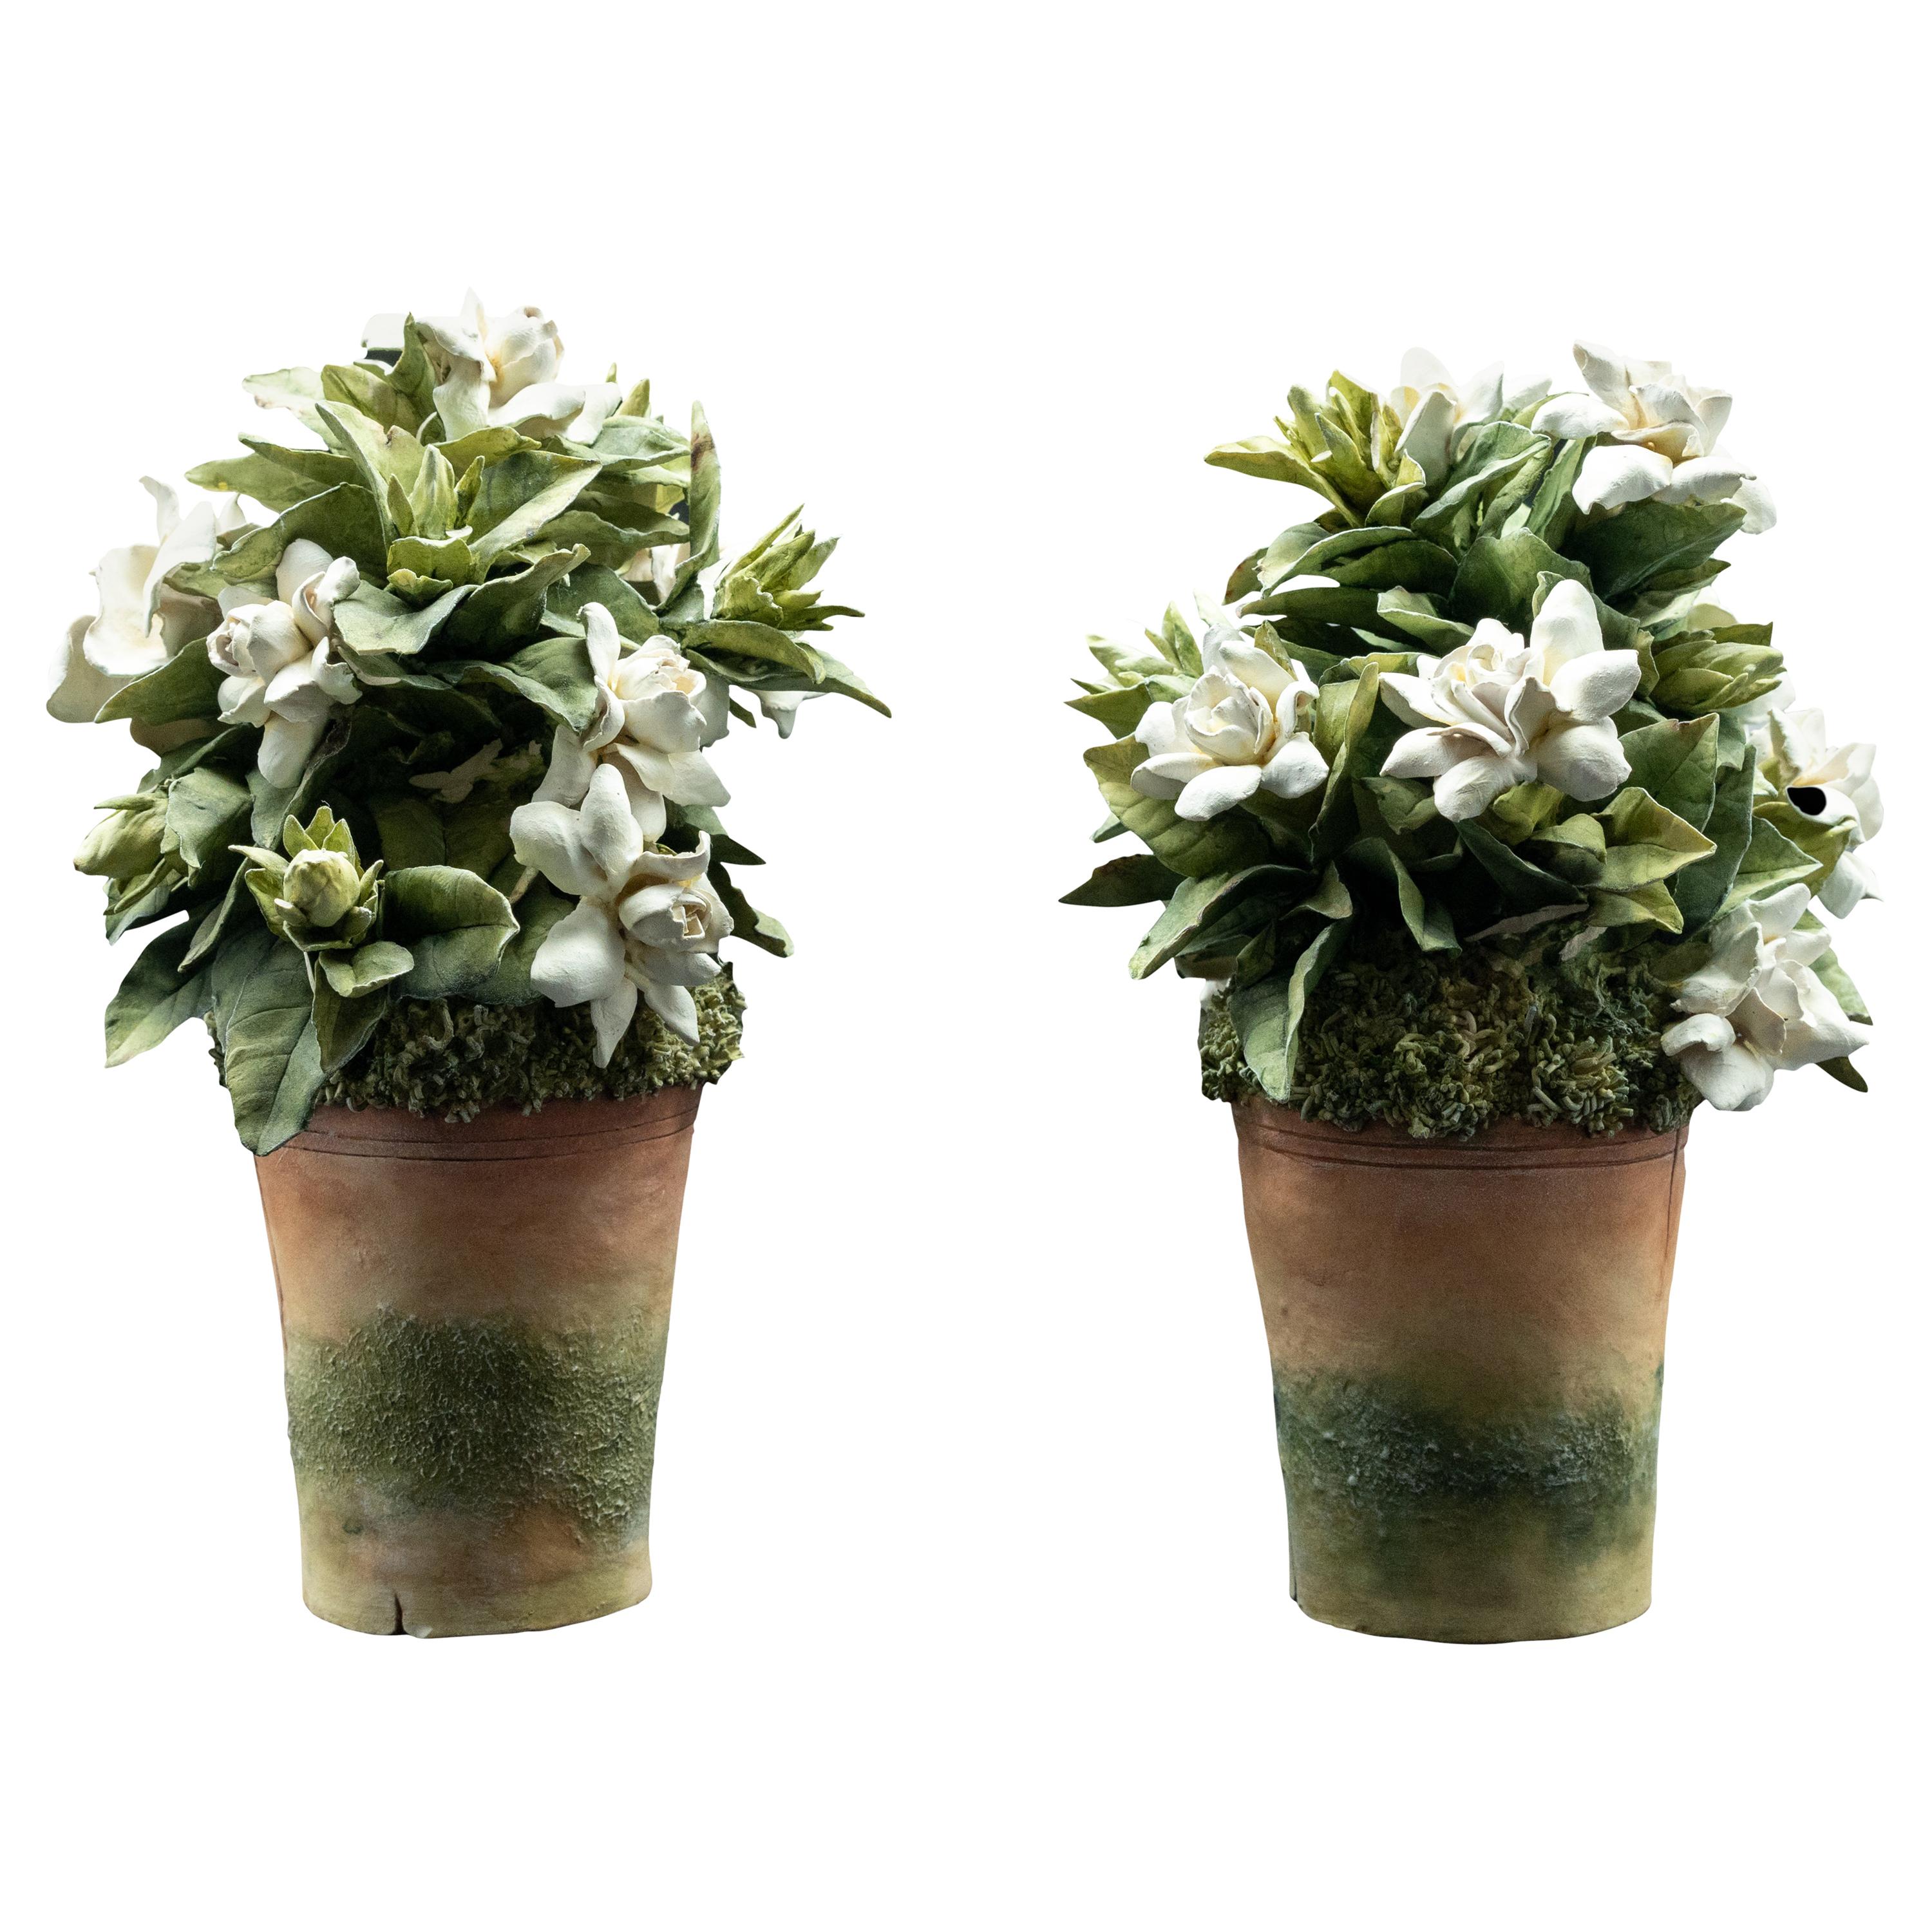 Clare Potter Pair of Porcelain White Gardenias in Pots